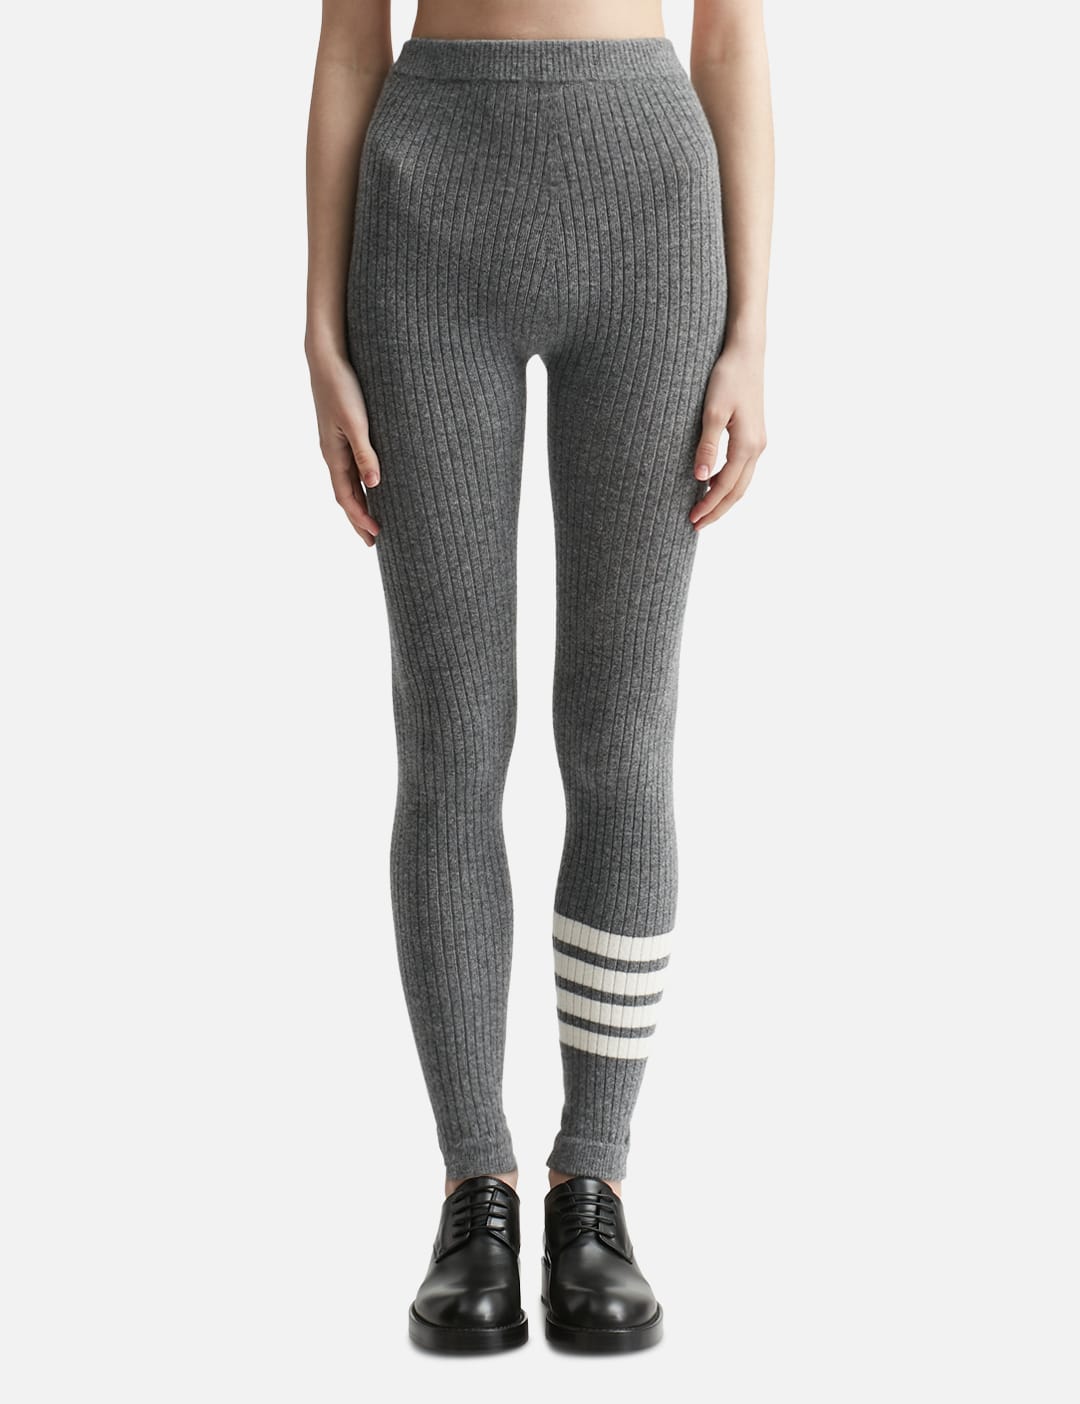 Thom Browne - Striped Knit Leggings | HBX - Globally Curated